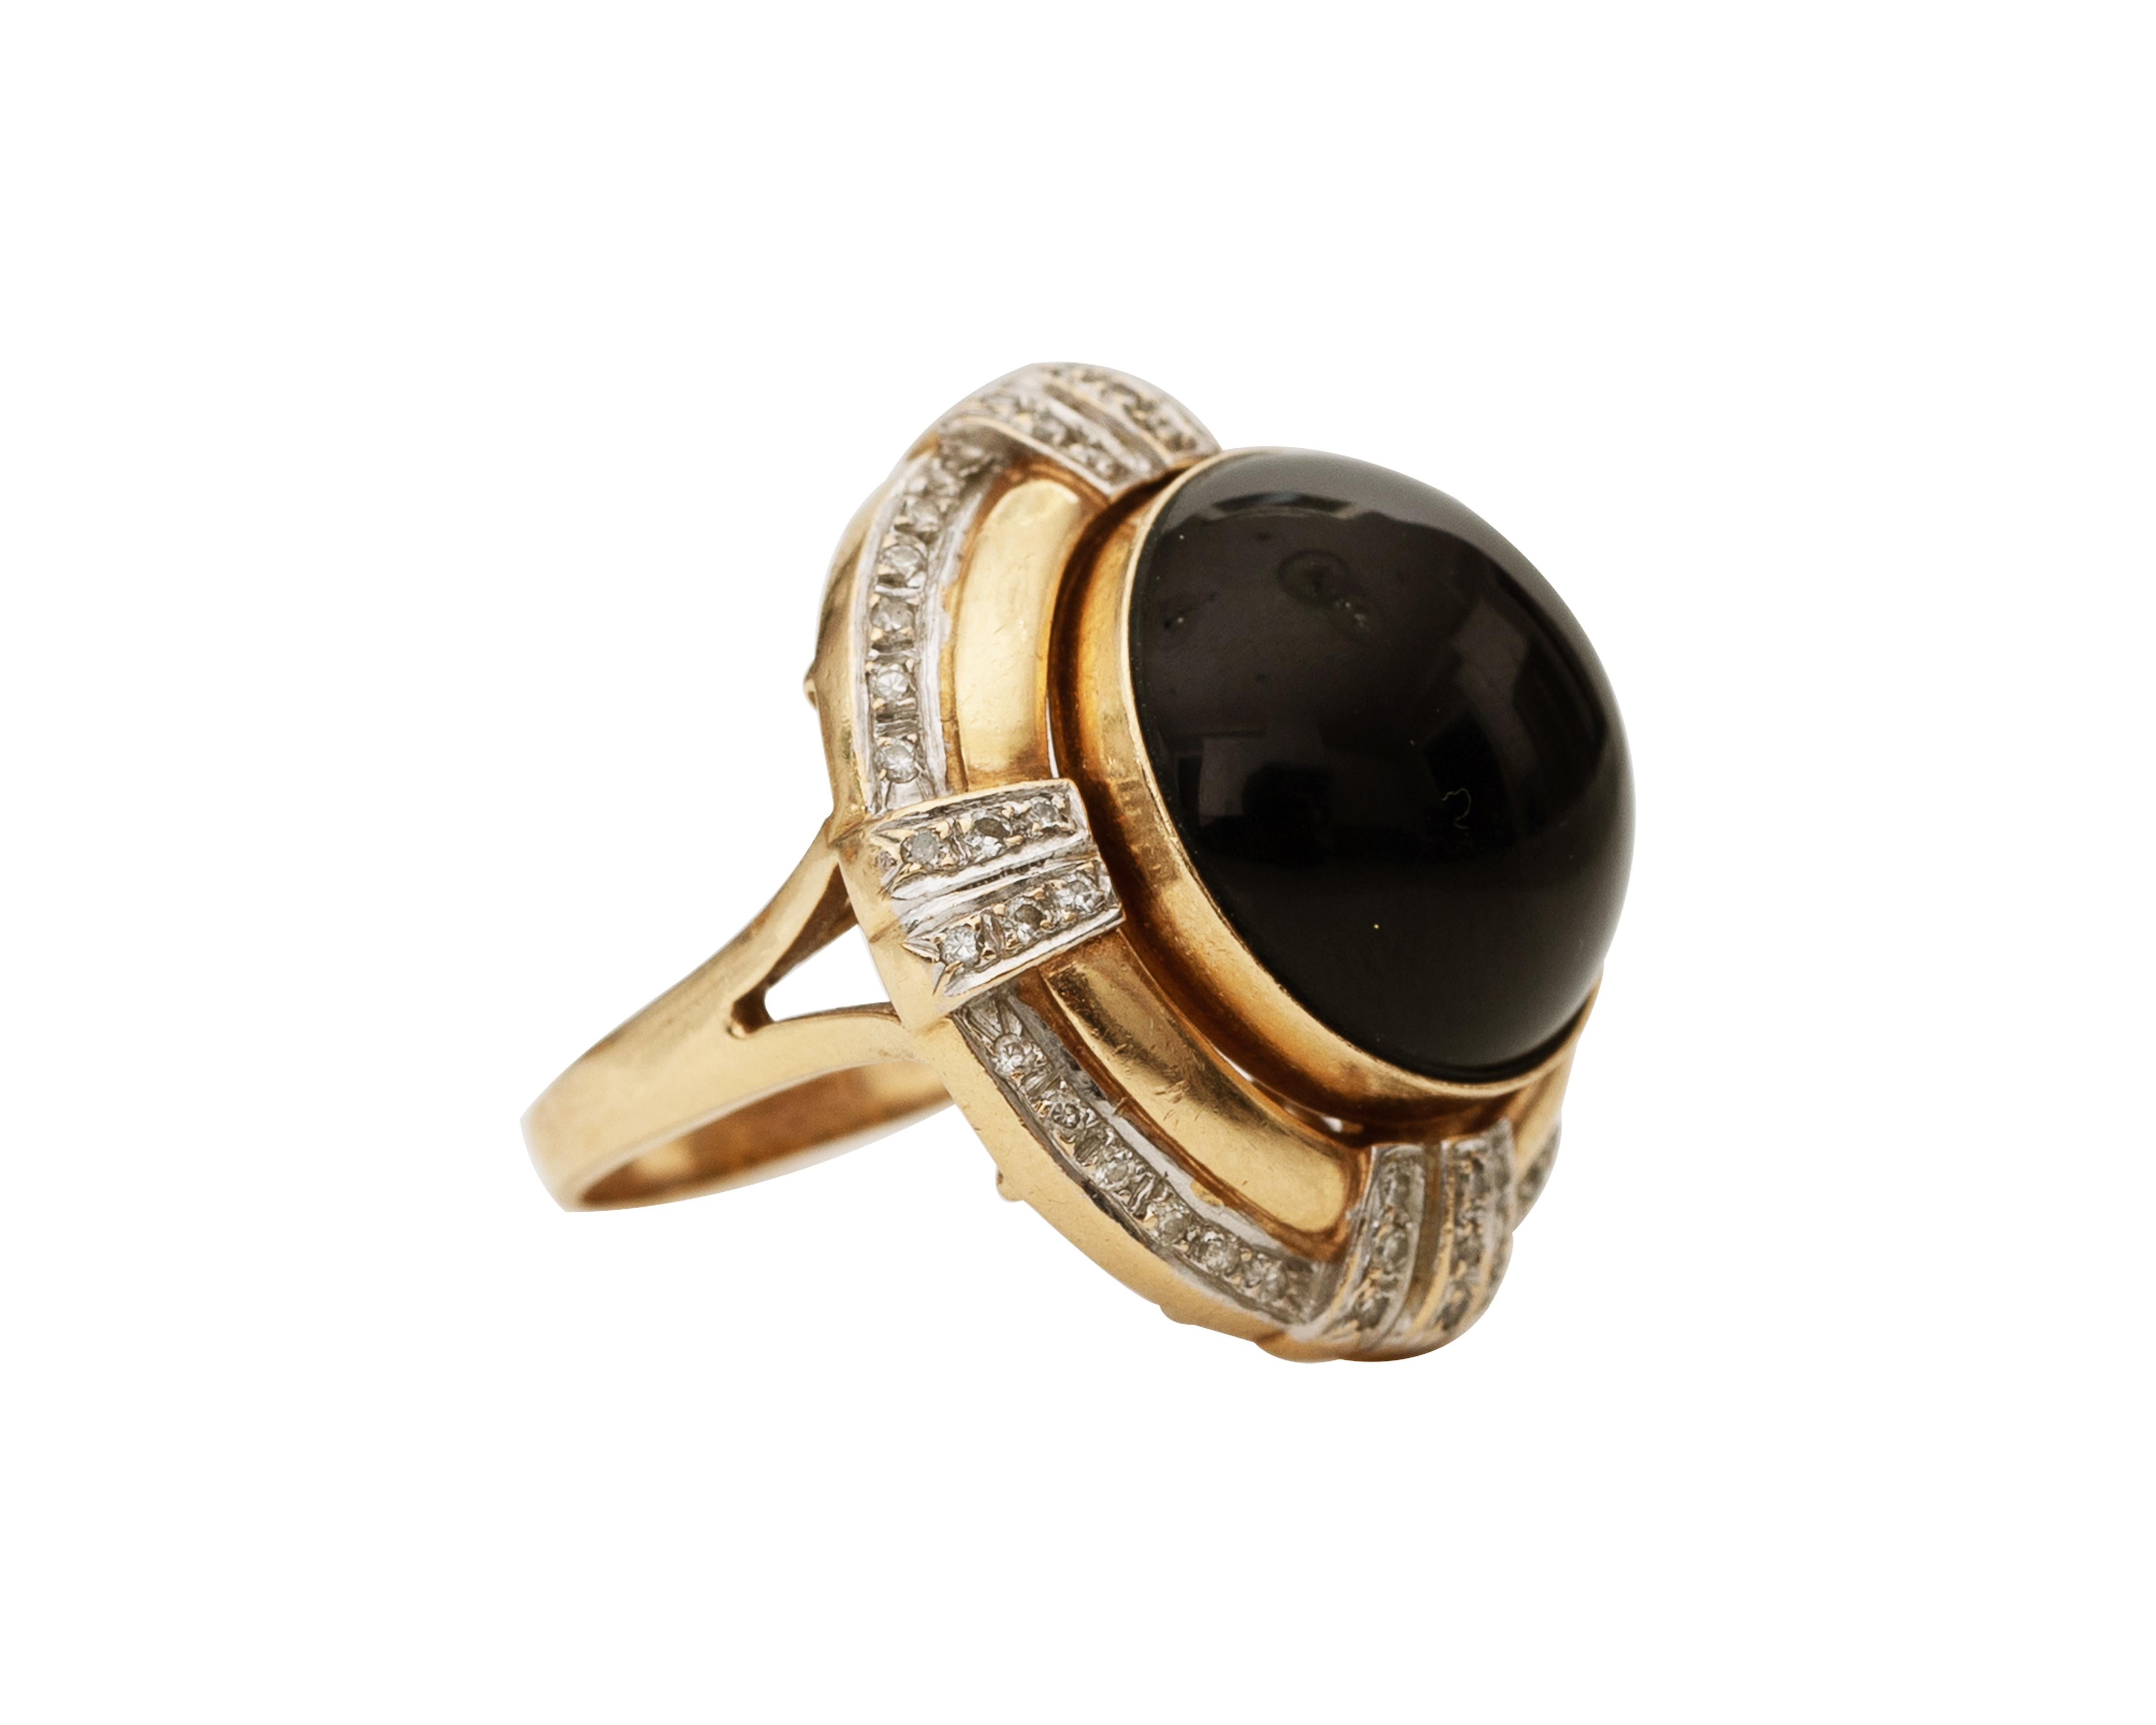 Very unique 4-in-1 Ring! This beautiful 1950s ring offers 4 different options listed below: 
4 top options:

1. Tigers Eye
2. Mabe Pearl
3. Malachite
4. Onyx
All measure 16 millimeter each. The gemstones can screw on and off very easily. This allows